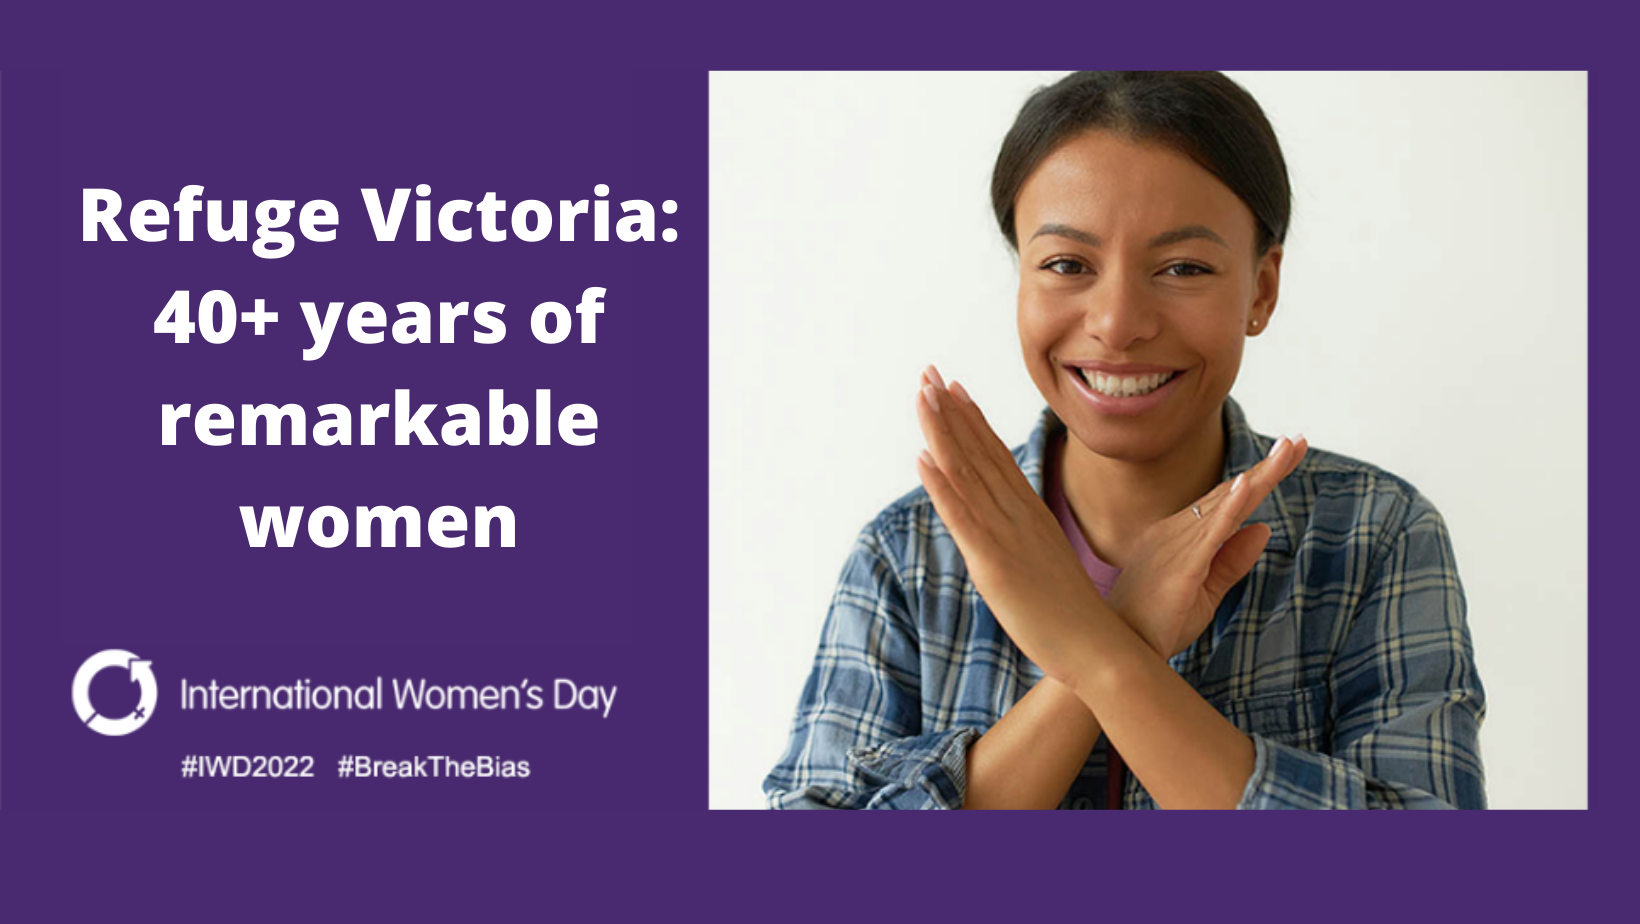 Refuge Victoria: 40+ years of remarkable women